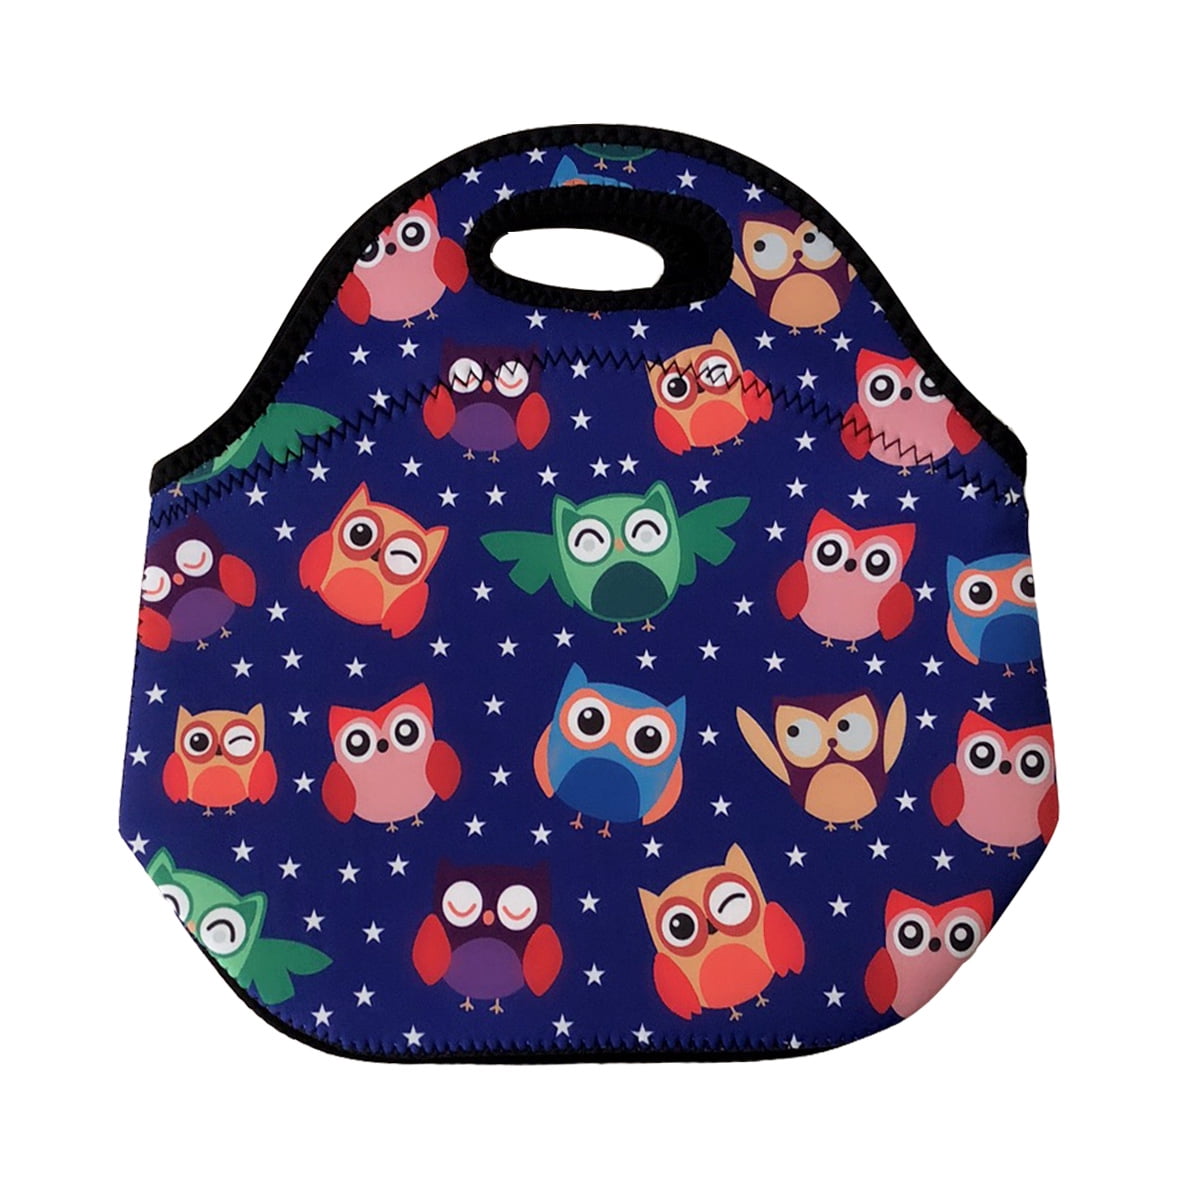 Lunch Box Bag Insulated Kids Owl Tote School Travel Girl Gift Pink Camp New 